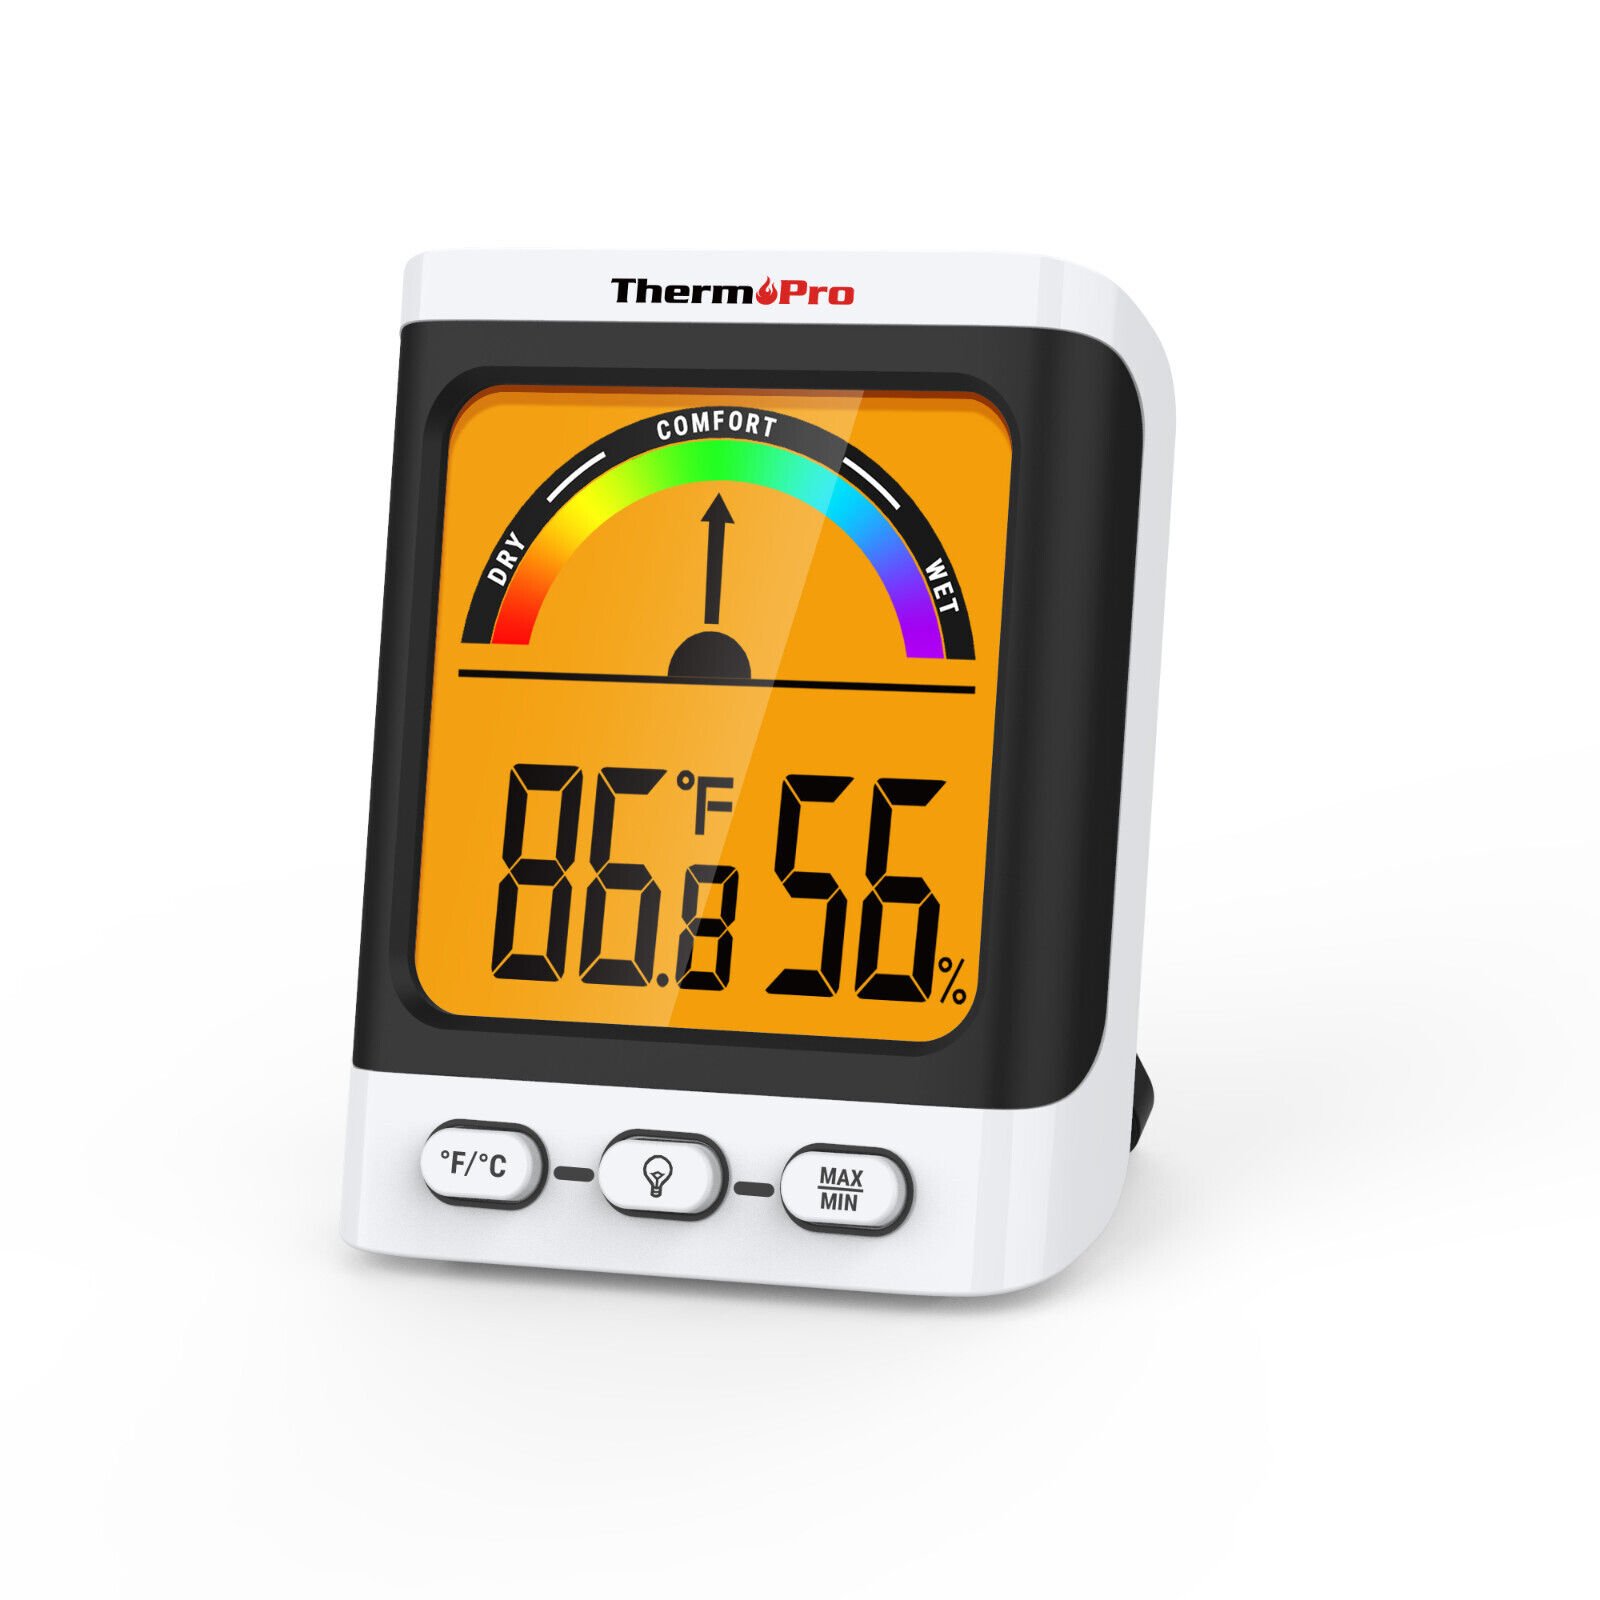 ThermoPro LCD Digital Hygrometer Indoor Thermometer Temperature Humidity Monitor